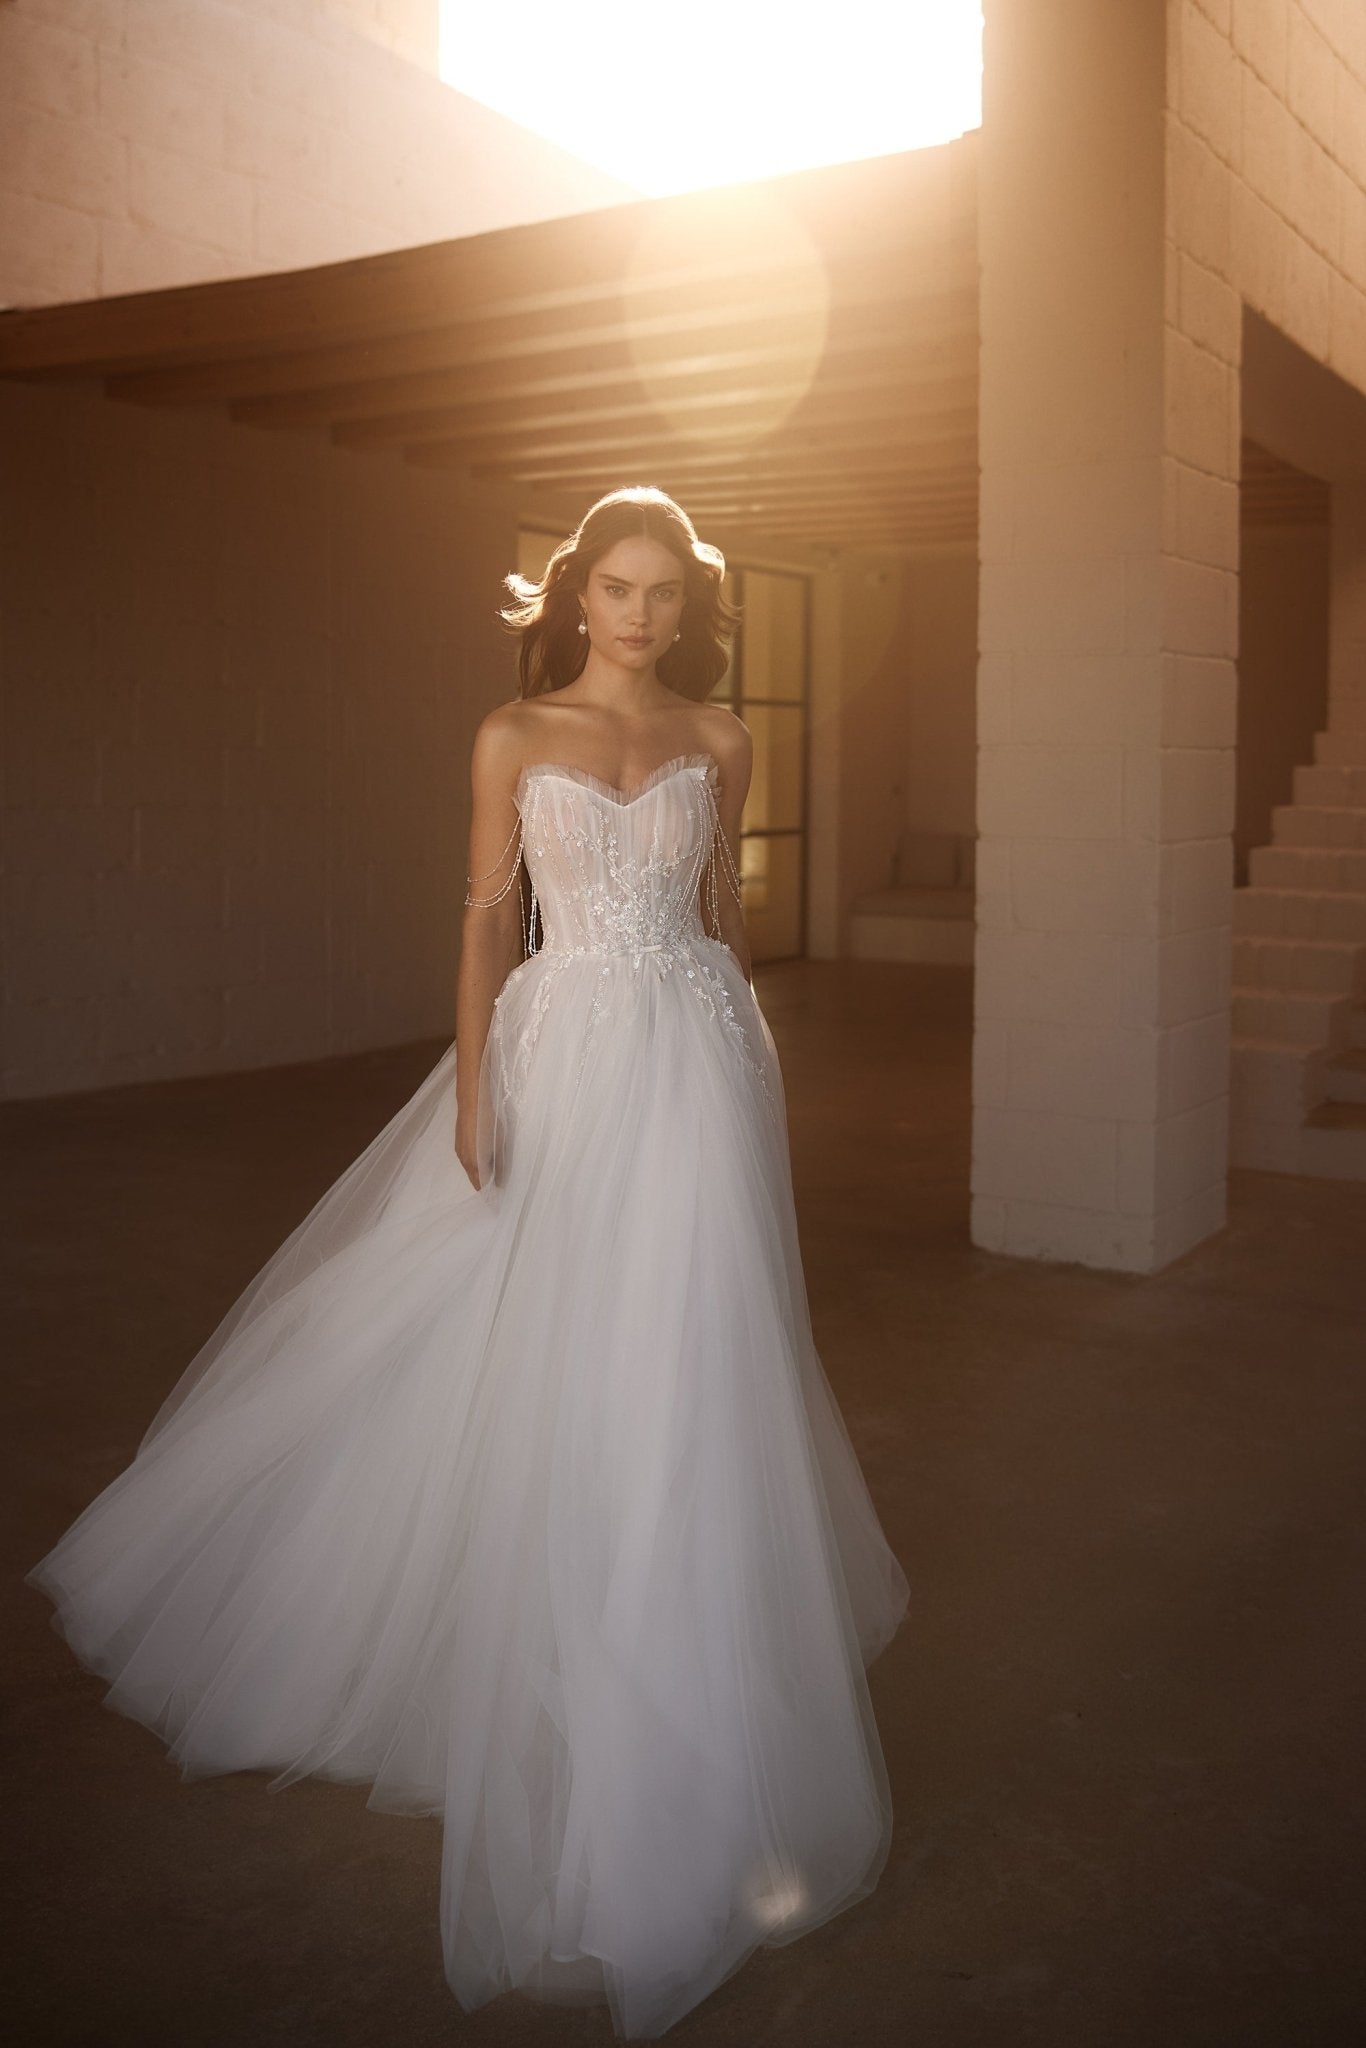 Radiant Strapless Tulle Bridal Gown with Beaded Detail and Ethereal Skirt Plus Size - WonderlandByLilian